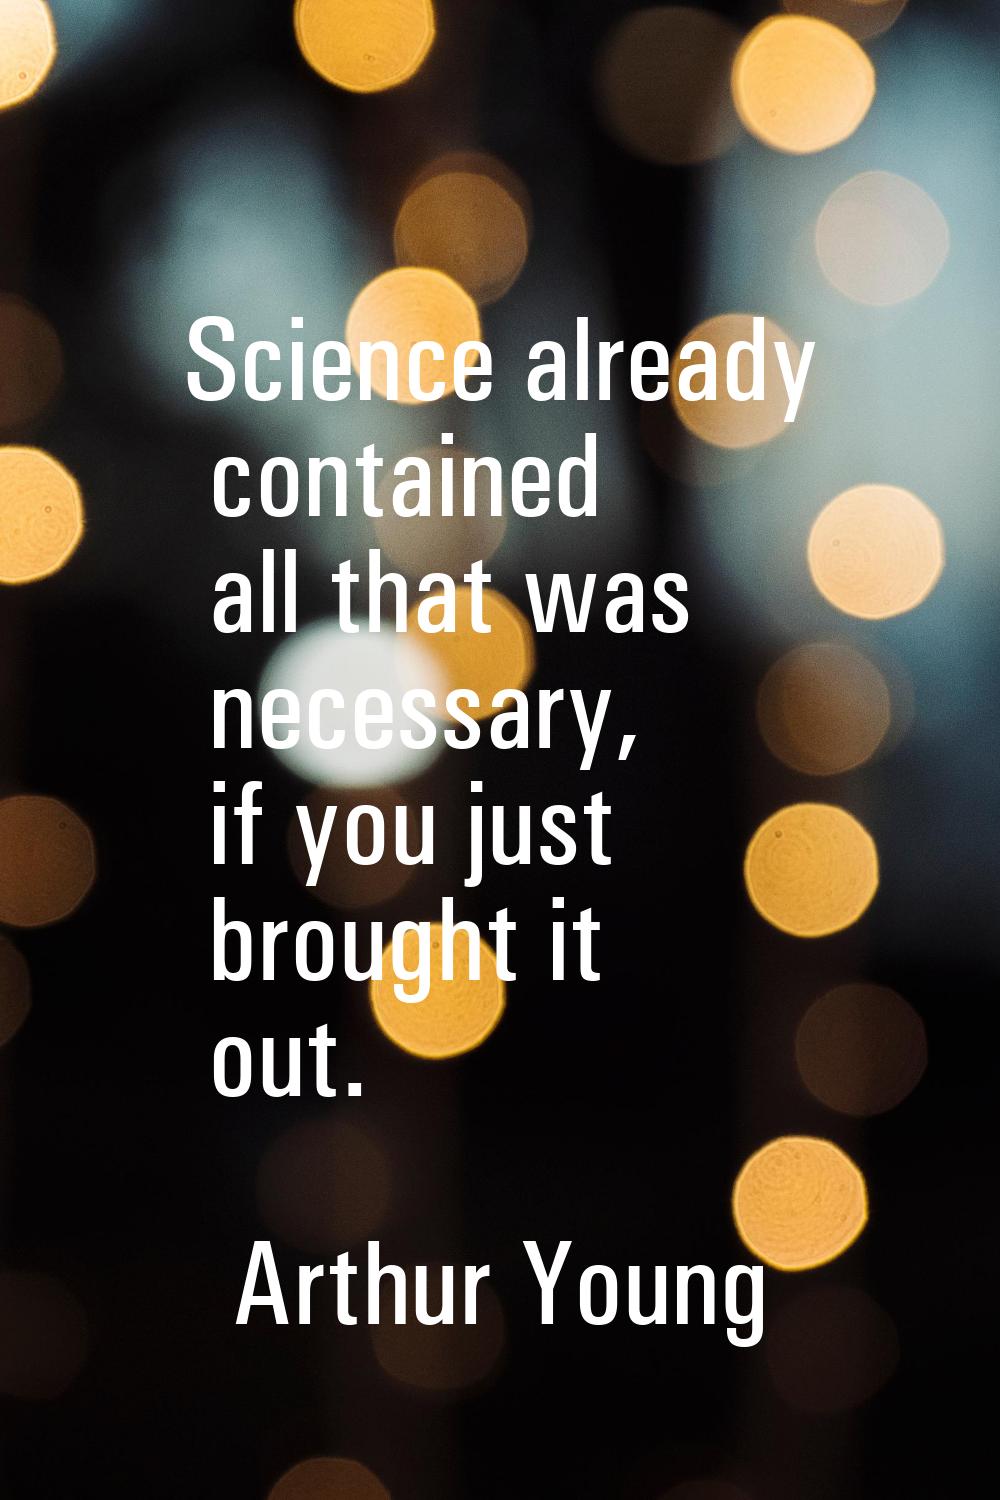 Science already contained all that was necessary, if you just brought it out.